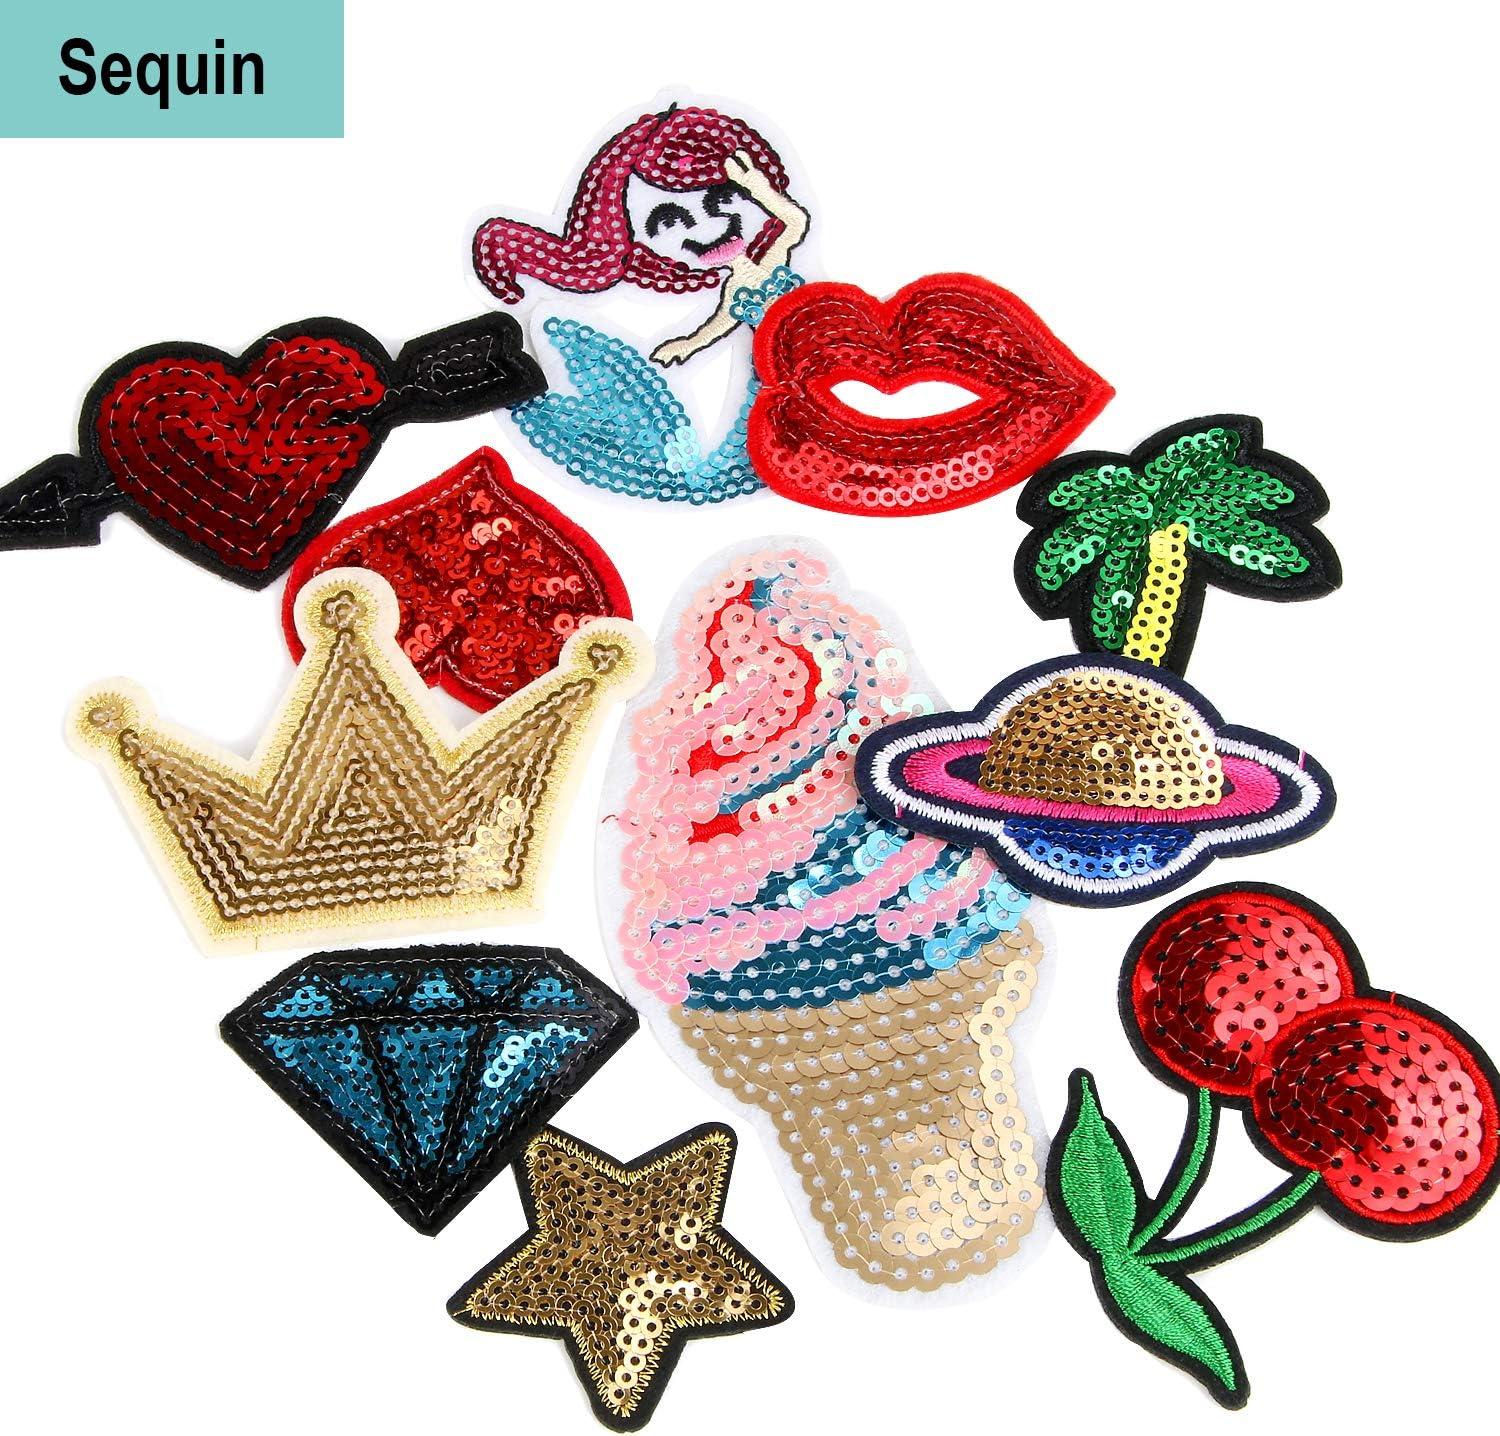 The Amazing Patches Iron on Patches for Clothing DIY Sew on